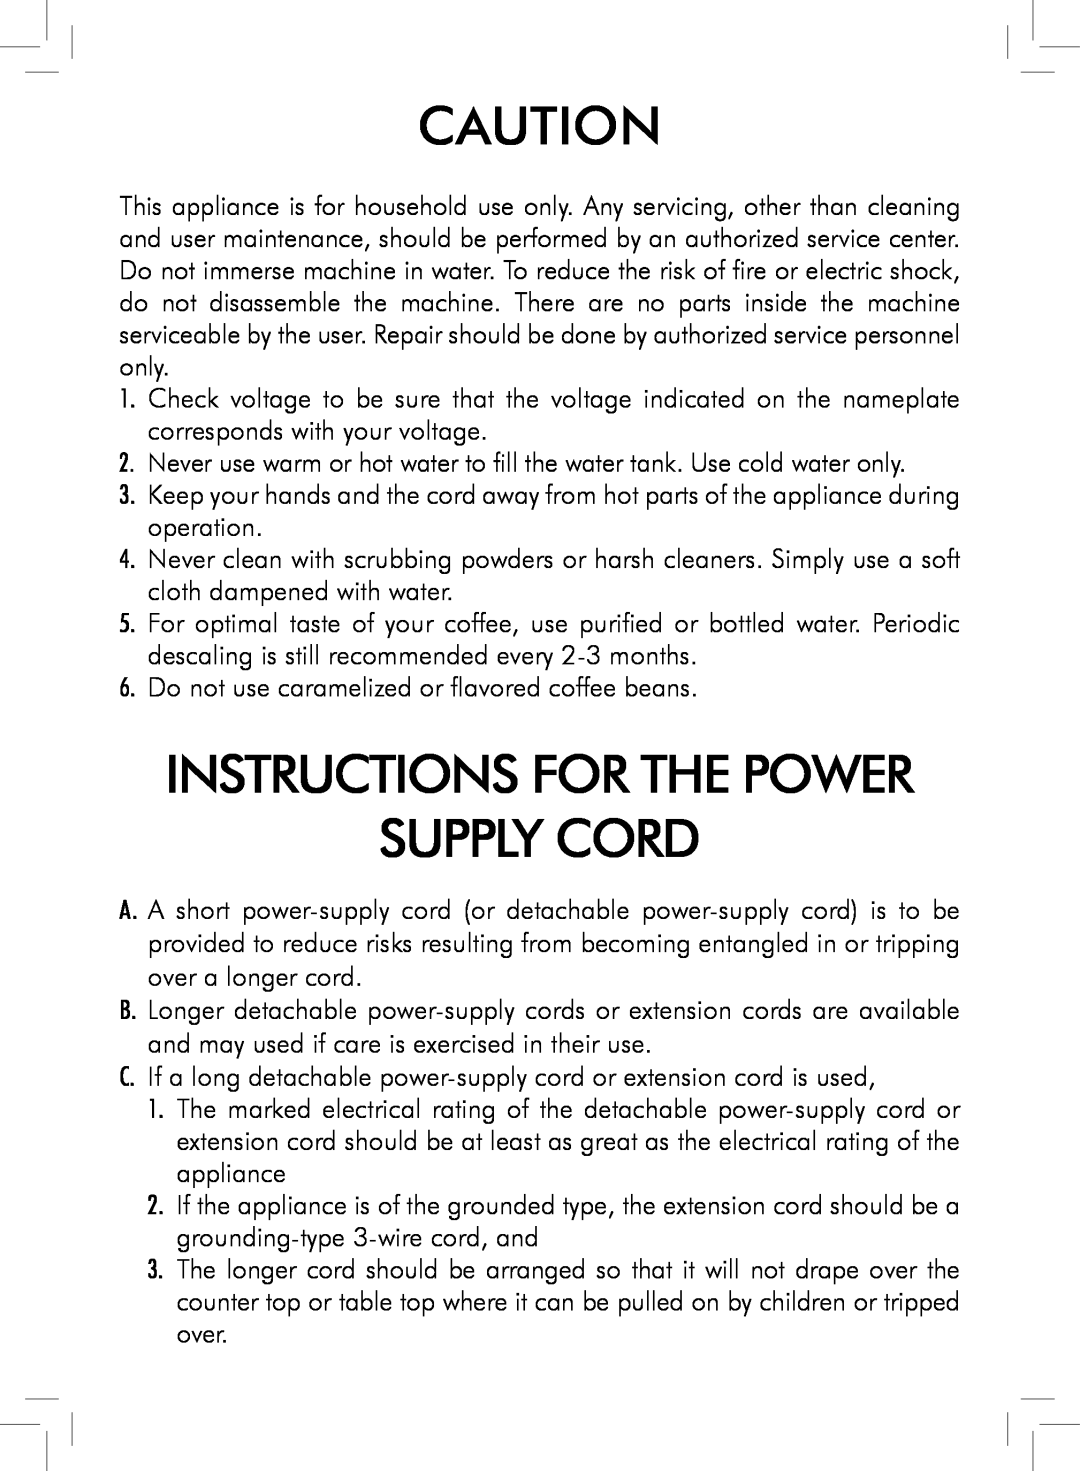 Saeco Coffee Makers HD8761, HD8764 manual Instructions For The Power Supply Cord 